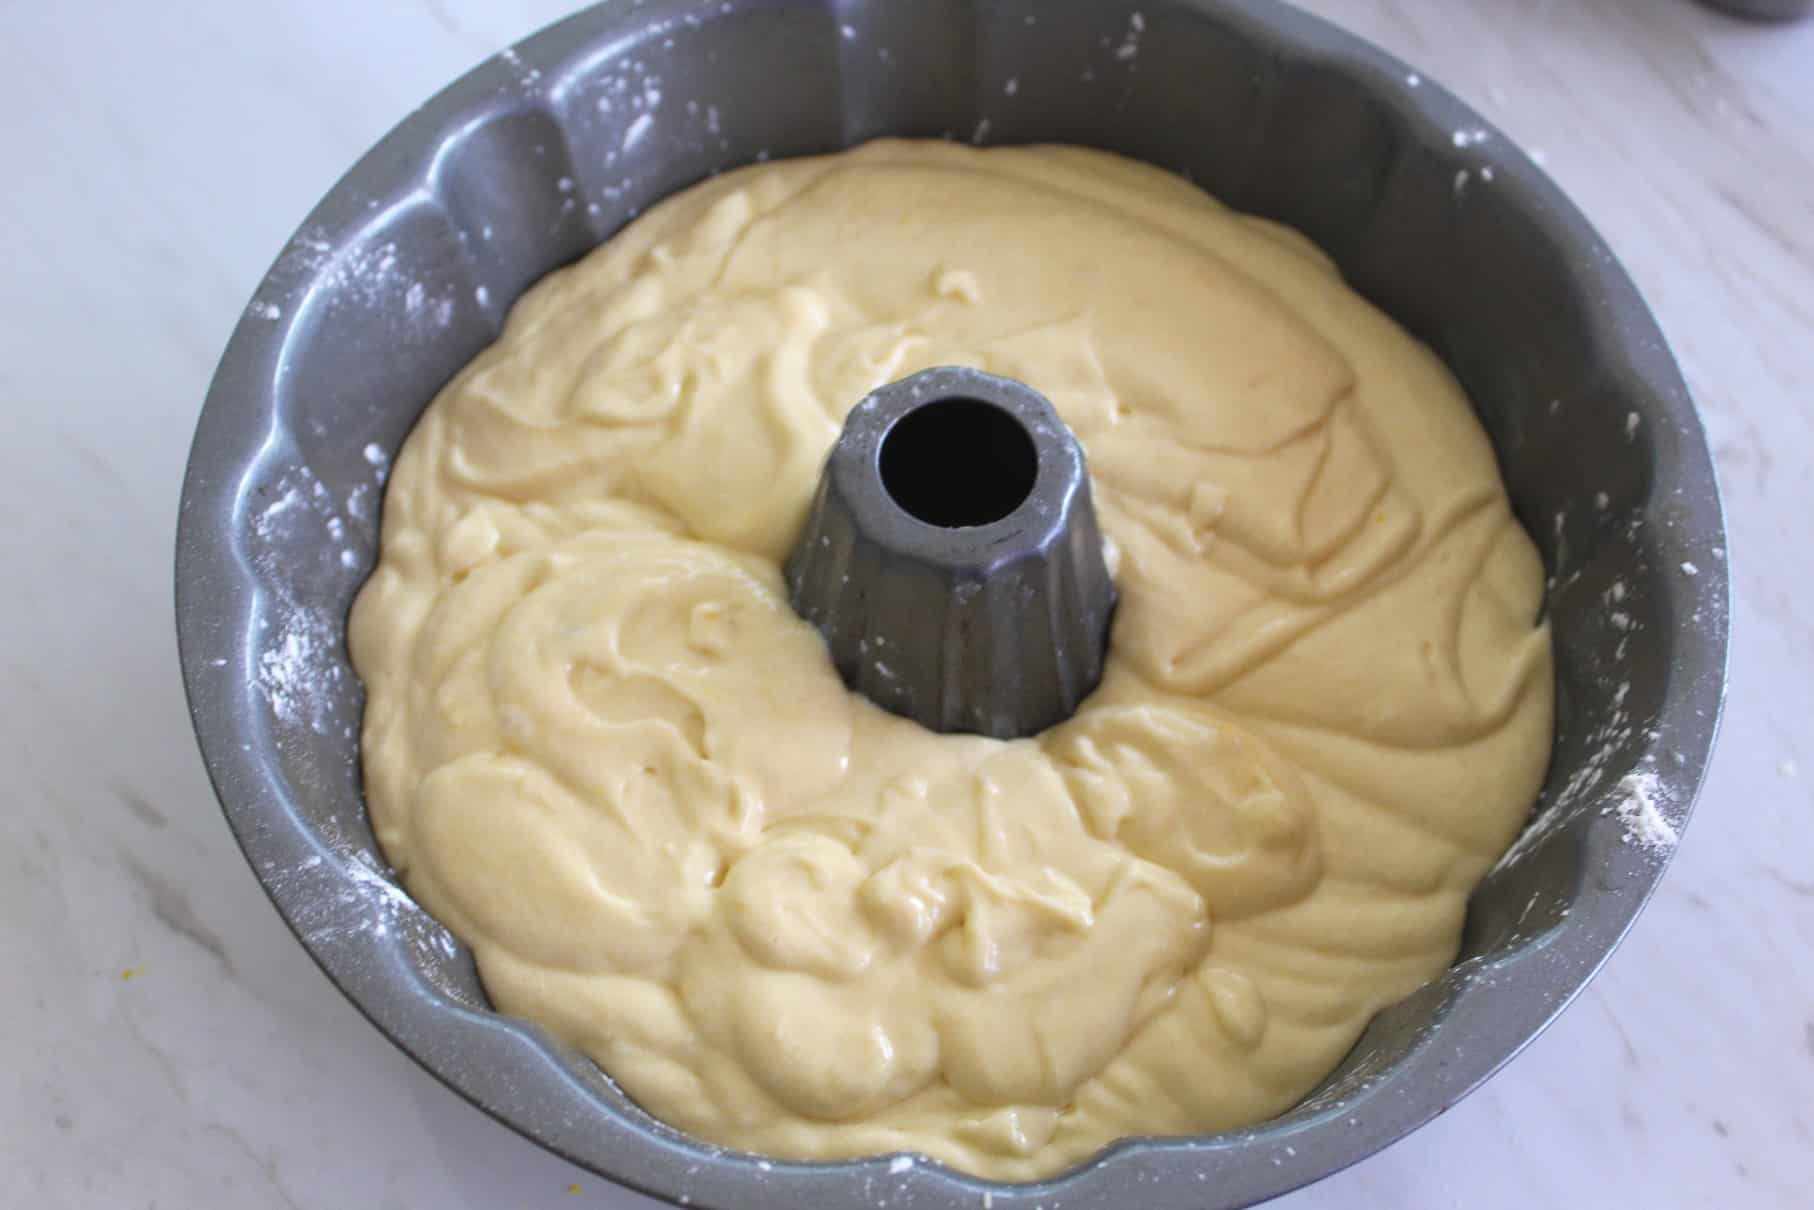 Cake batter in the bundt cake pan. Pan looks to be dusted. It all looks ready to bake.